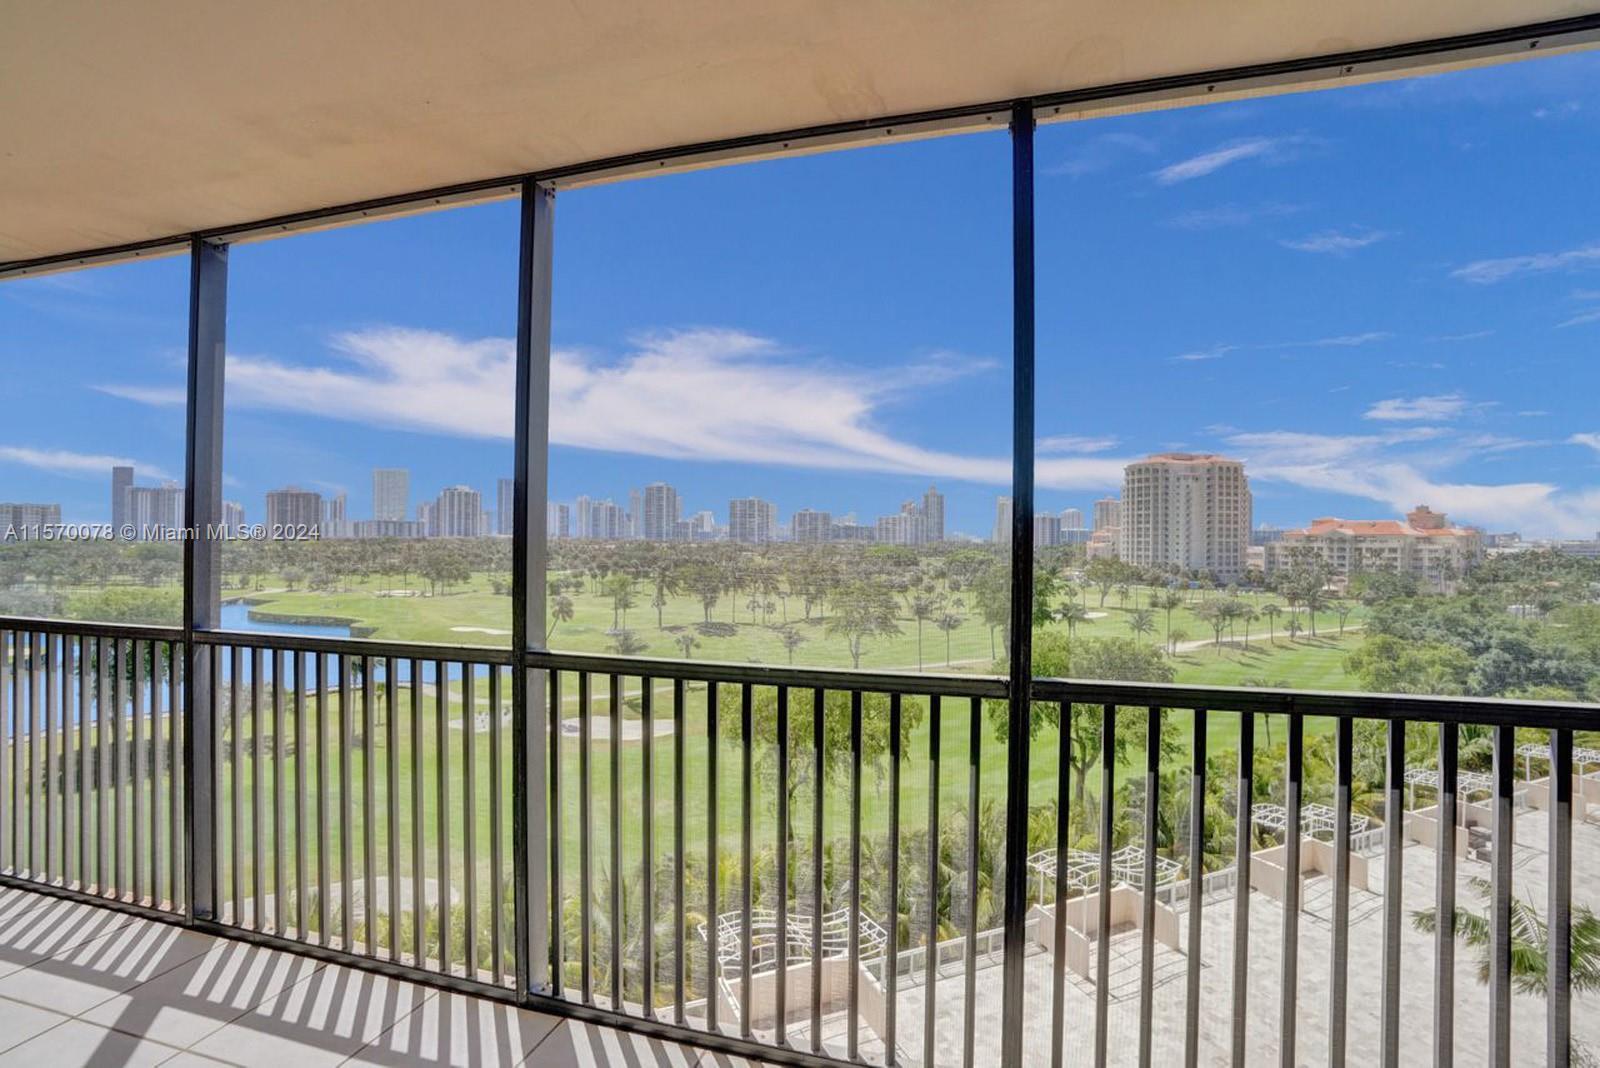 EXCELLENT 1 BED 1.5 BATH CONDO IN CORONADO TOWER 2 IN DESIRED AVENTURA.  THE BEST VIEWS OF TURNBERRY